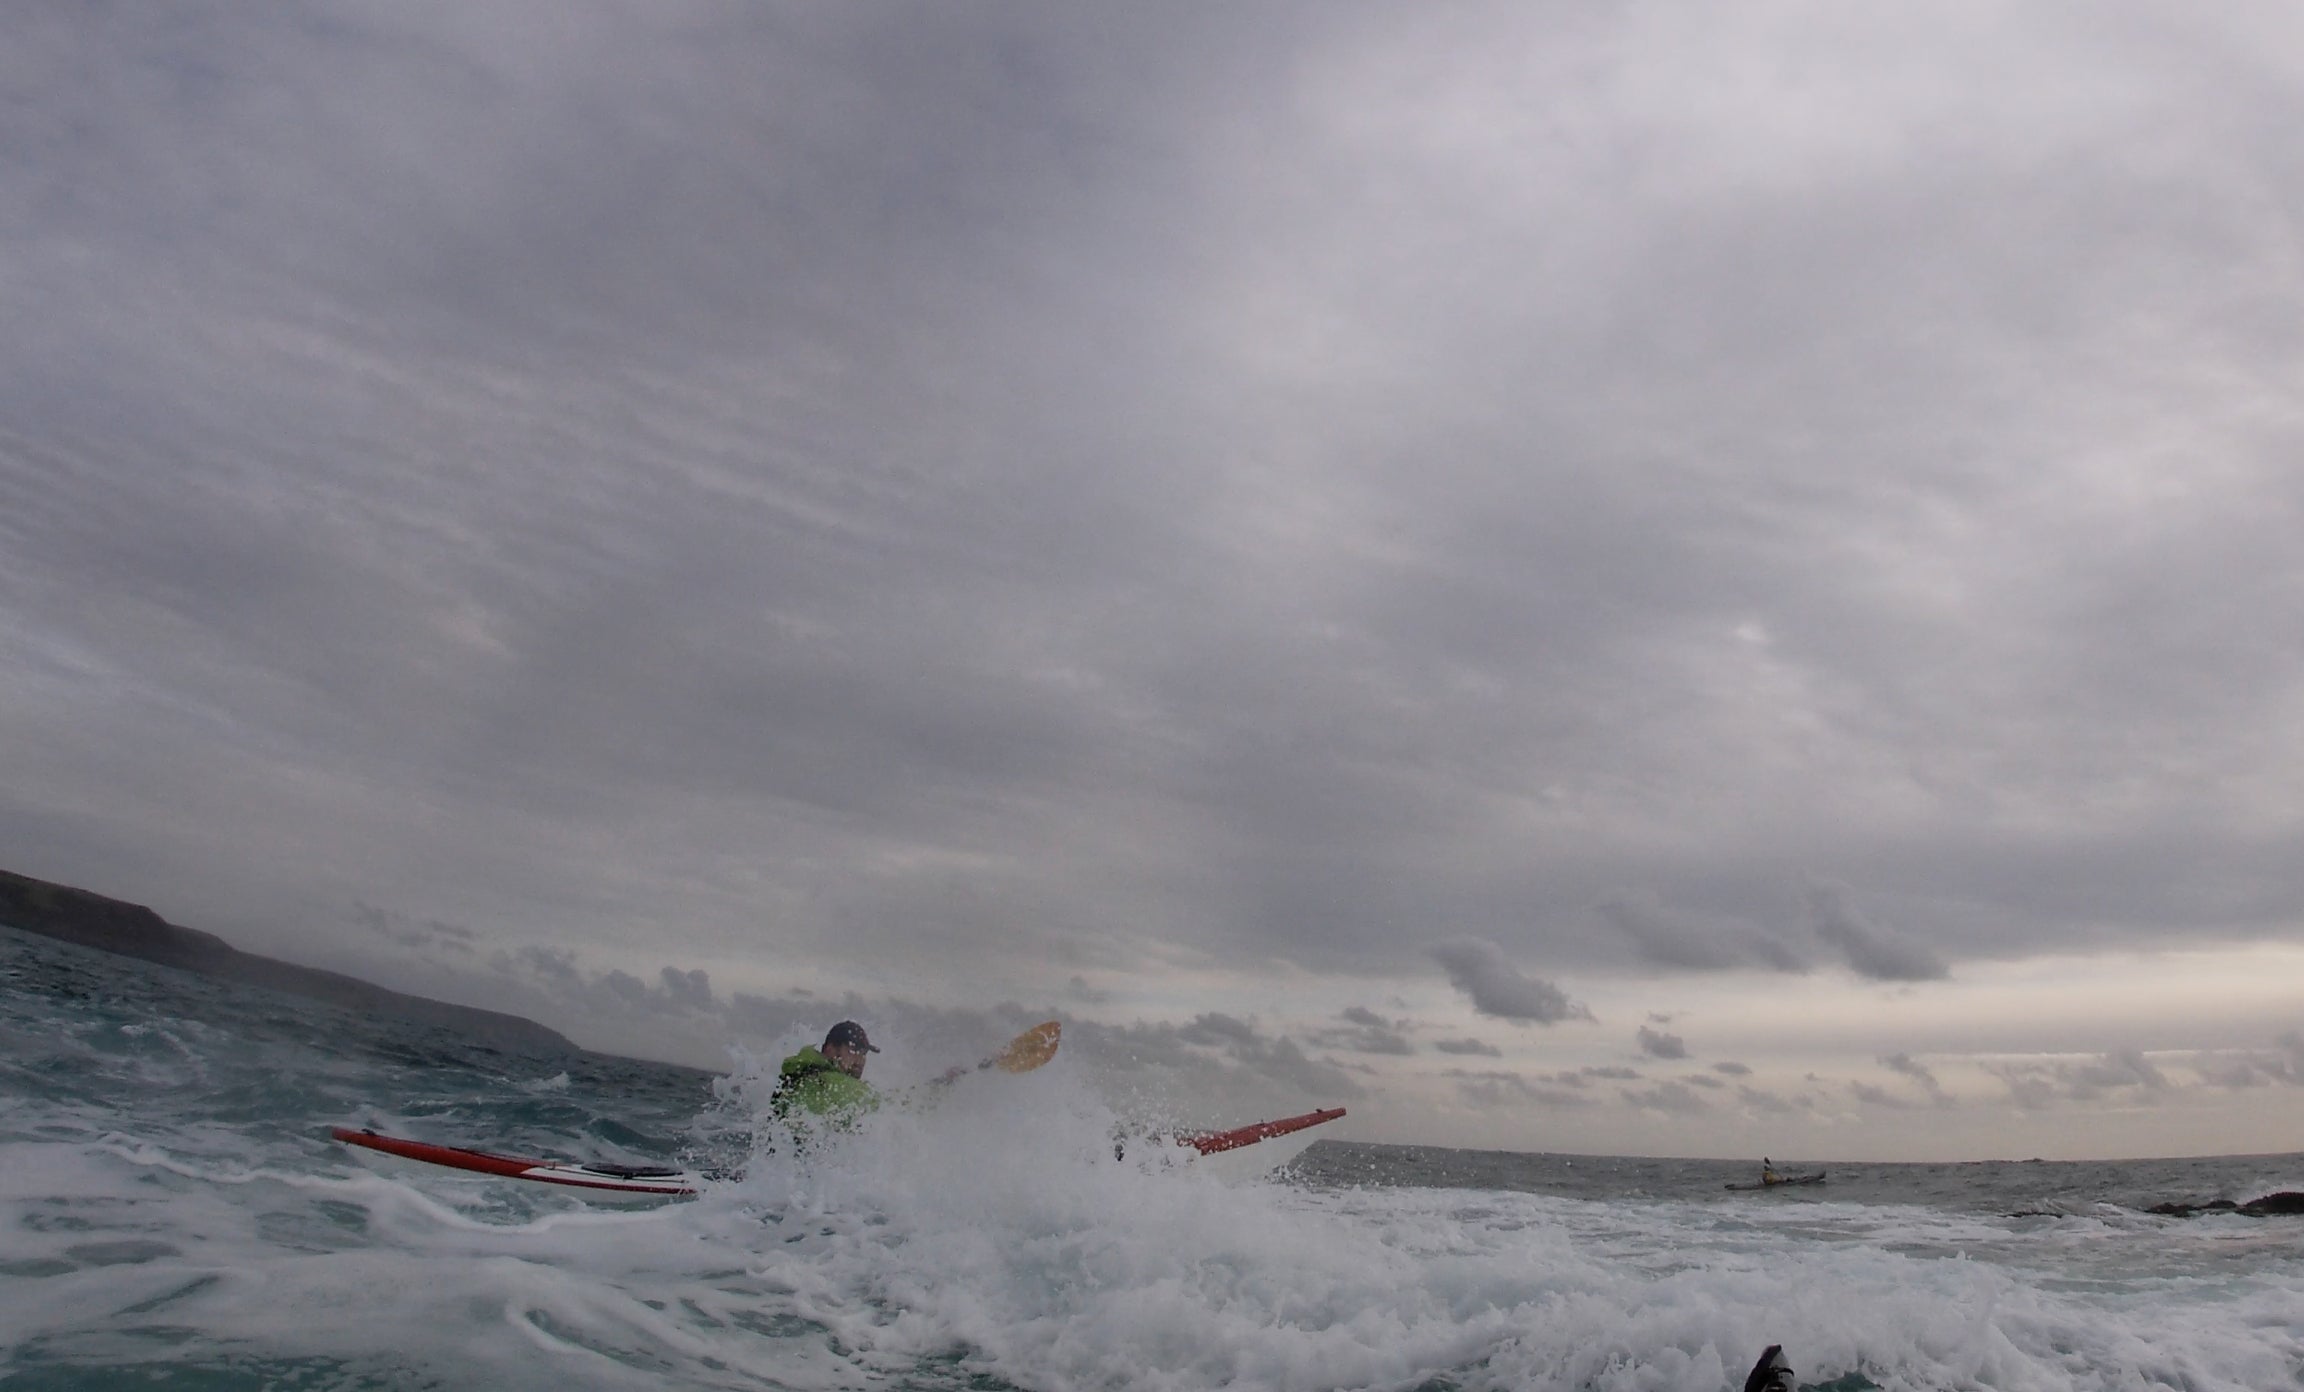 Staff Member Andrew punching through a wave using Corryvreckan 220 paddles off Gribbin Head